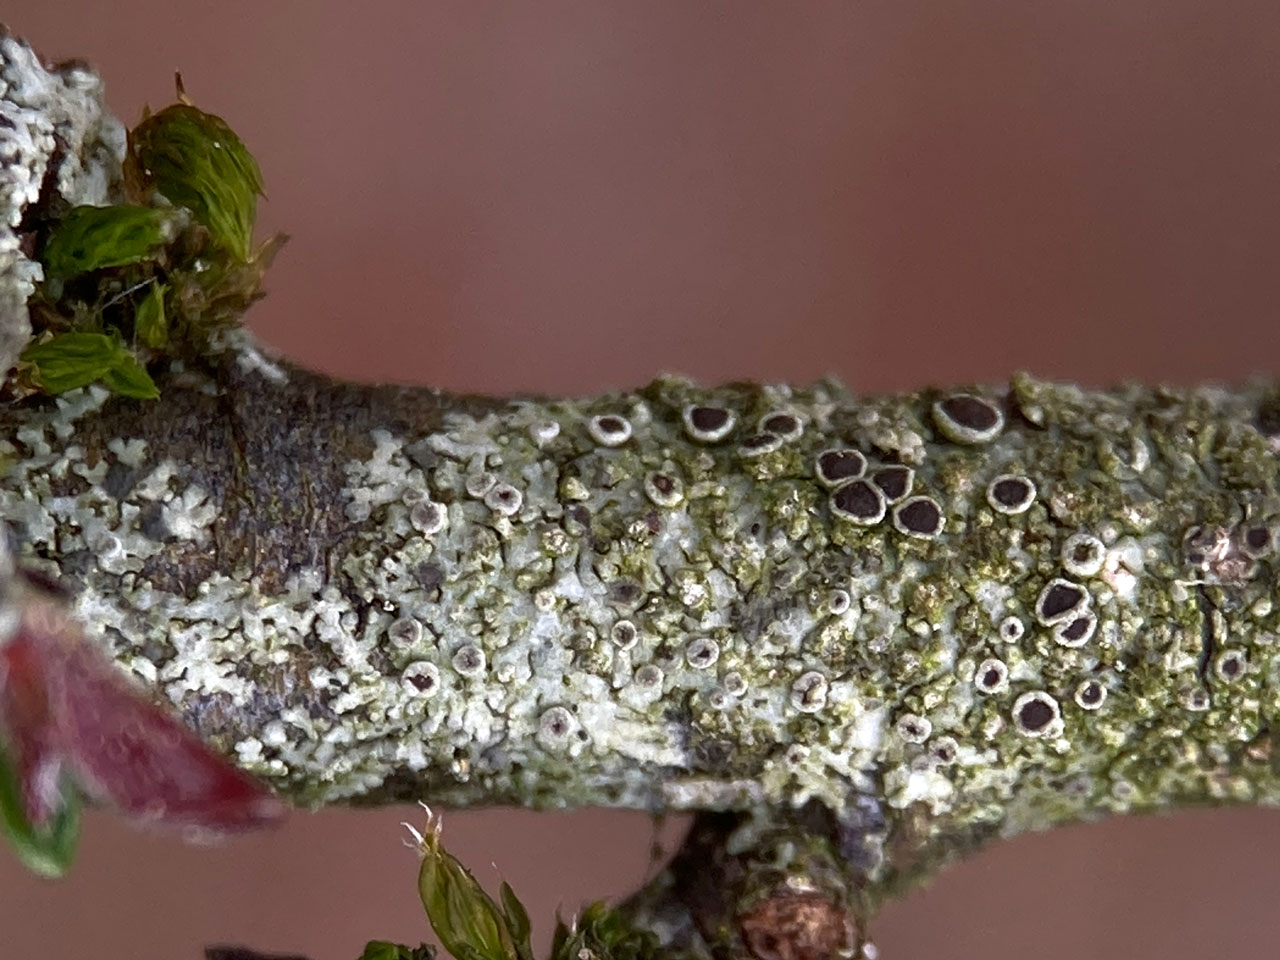 Hyperphyscia with apothecia, on Cotoneaster, Woodlands Road, South Hampshire 